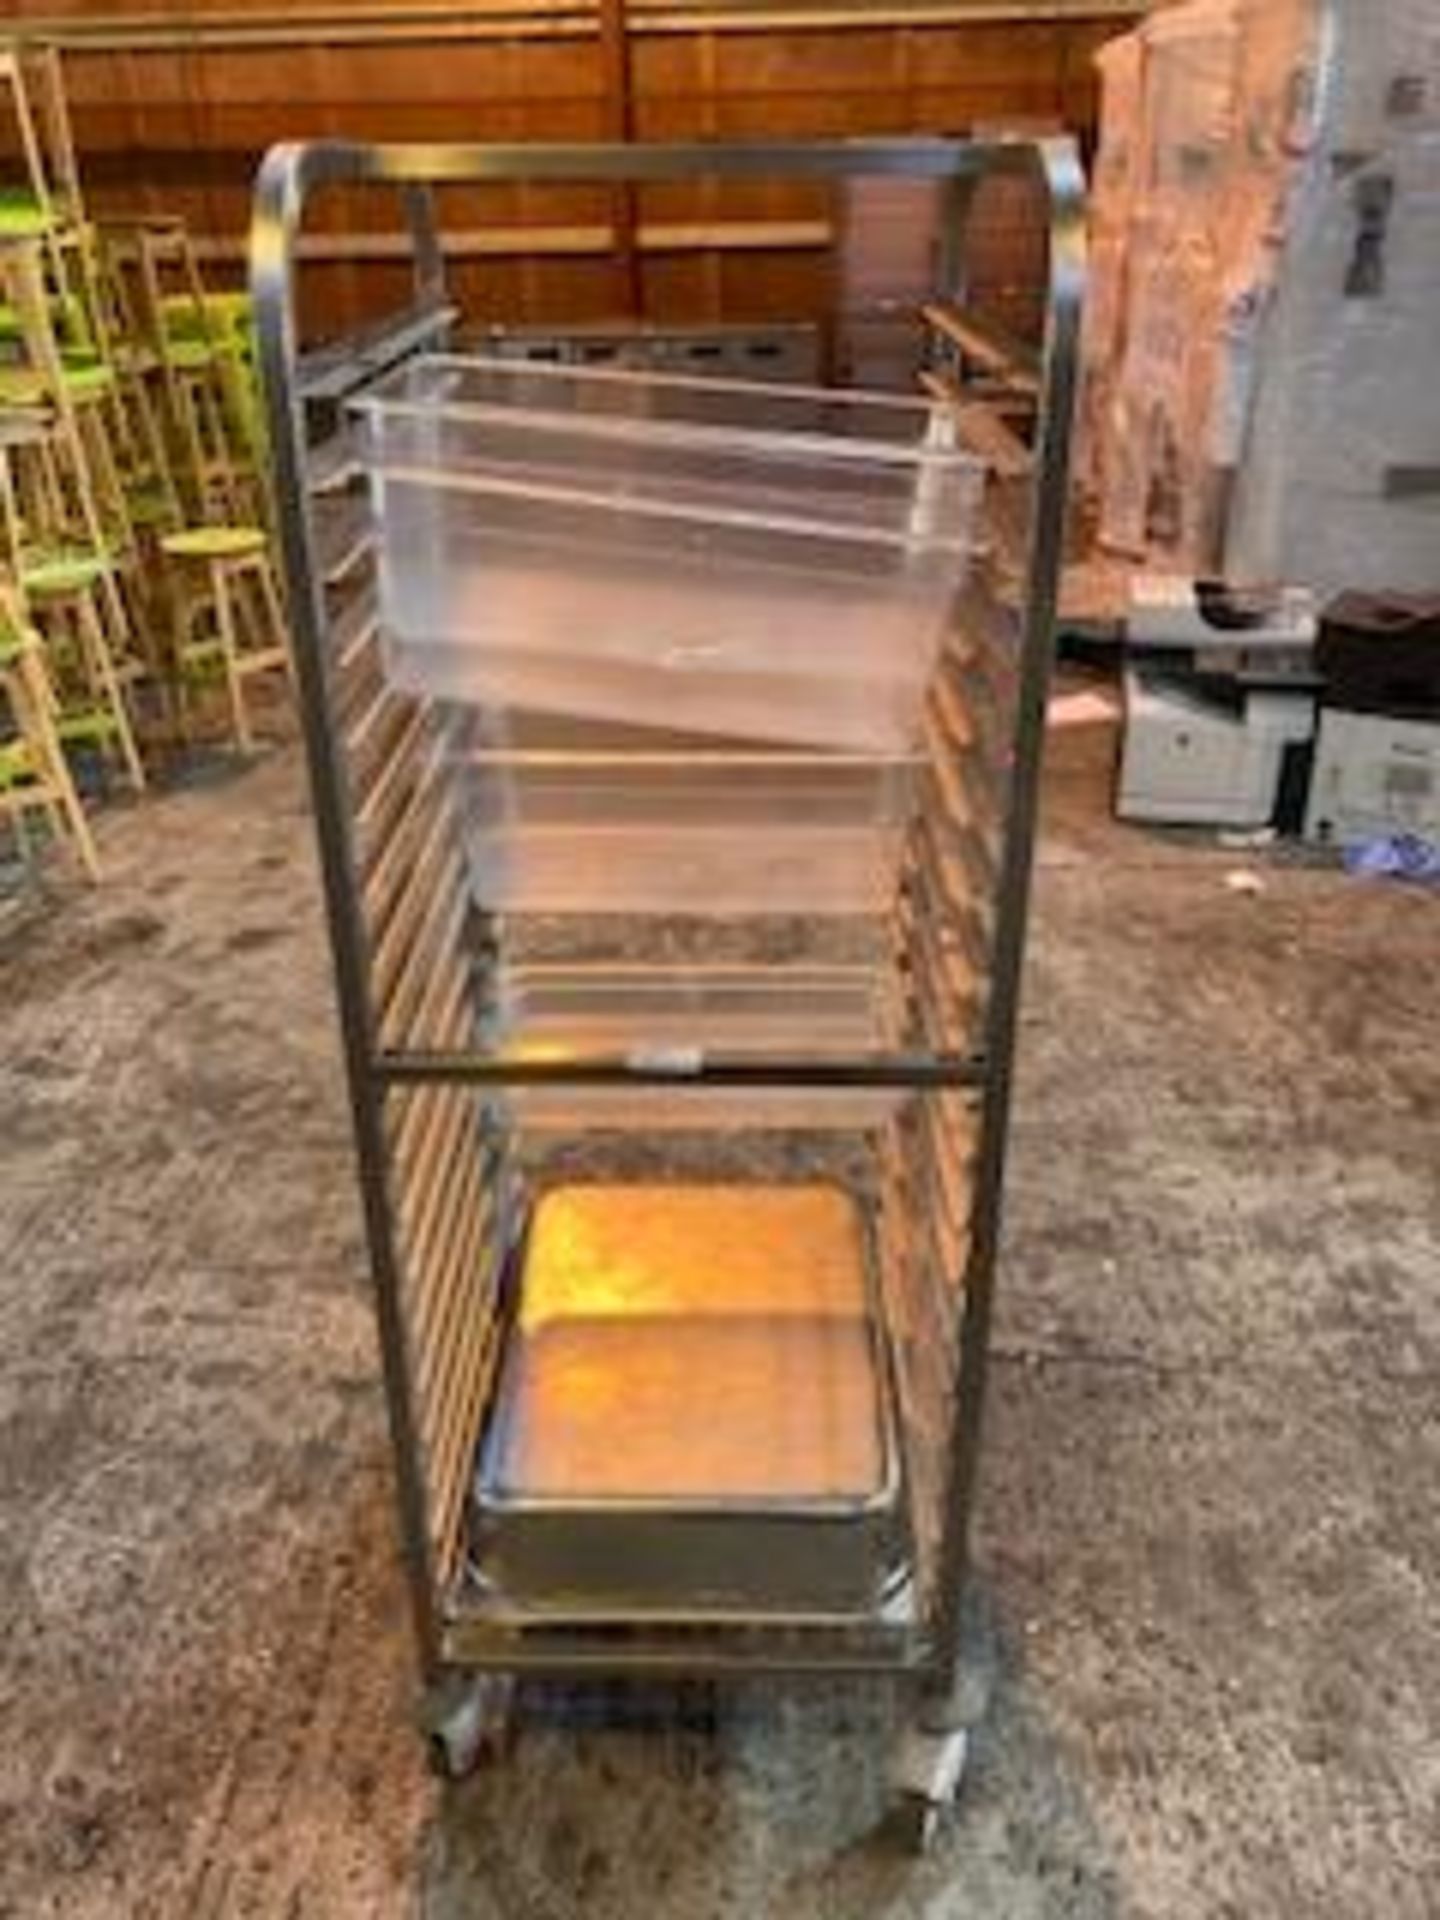 Stainless steel Gastronorm Rack /Tray / Pan Trolley & Trays - Image 3 of 3